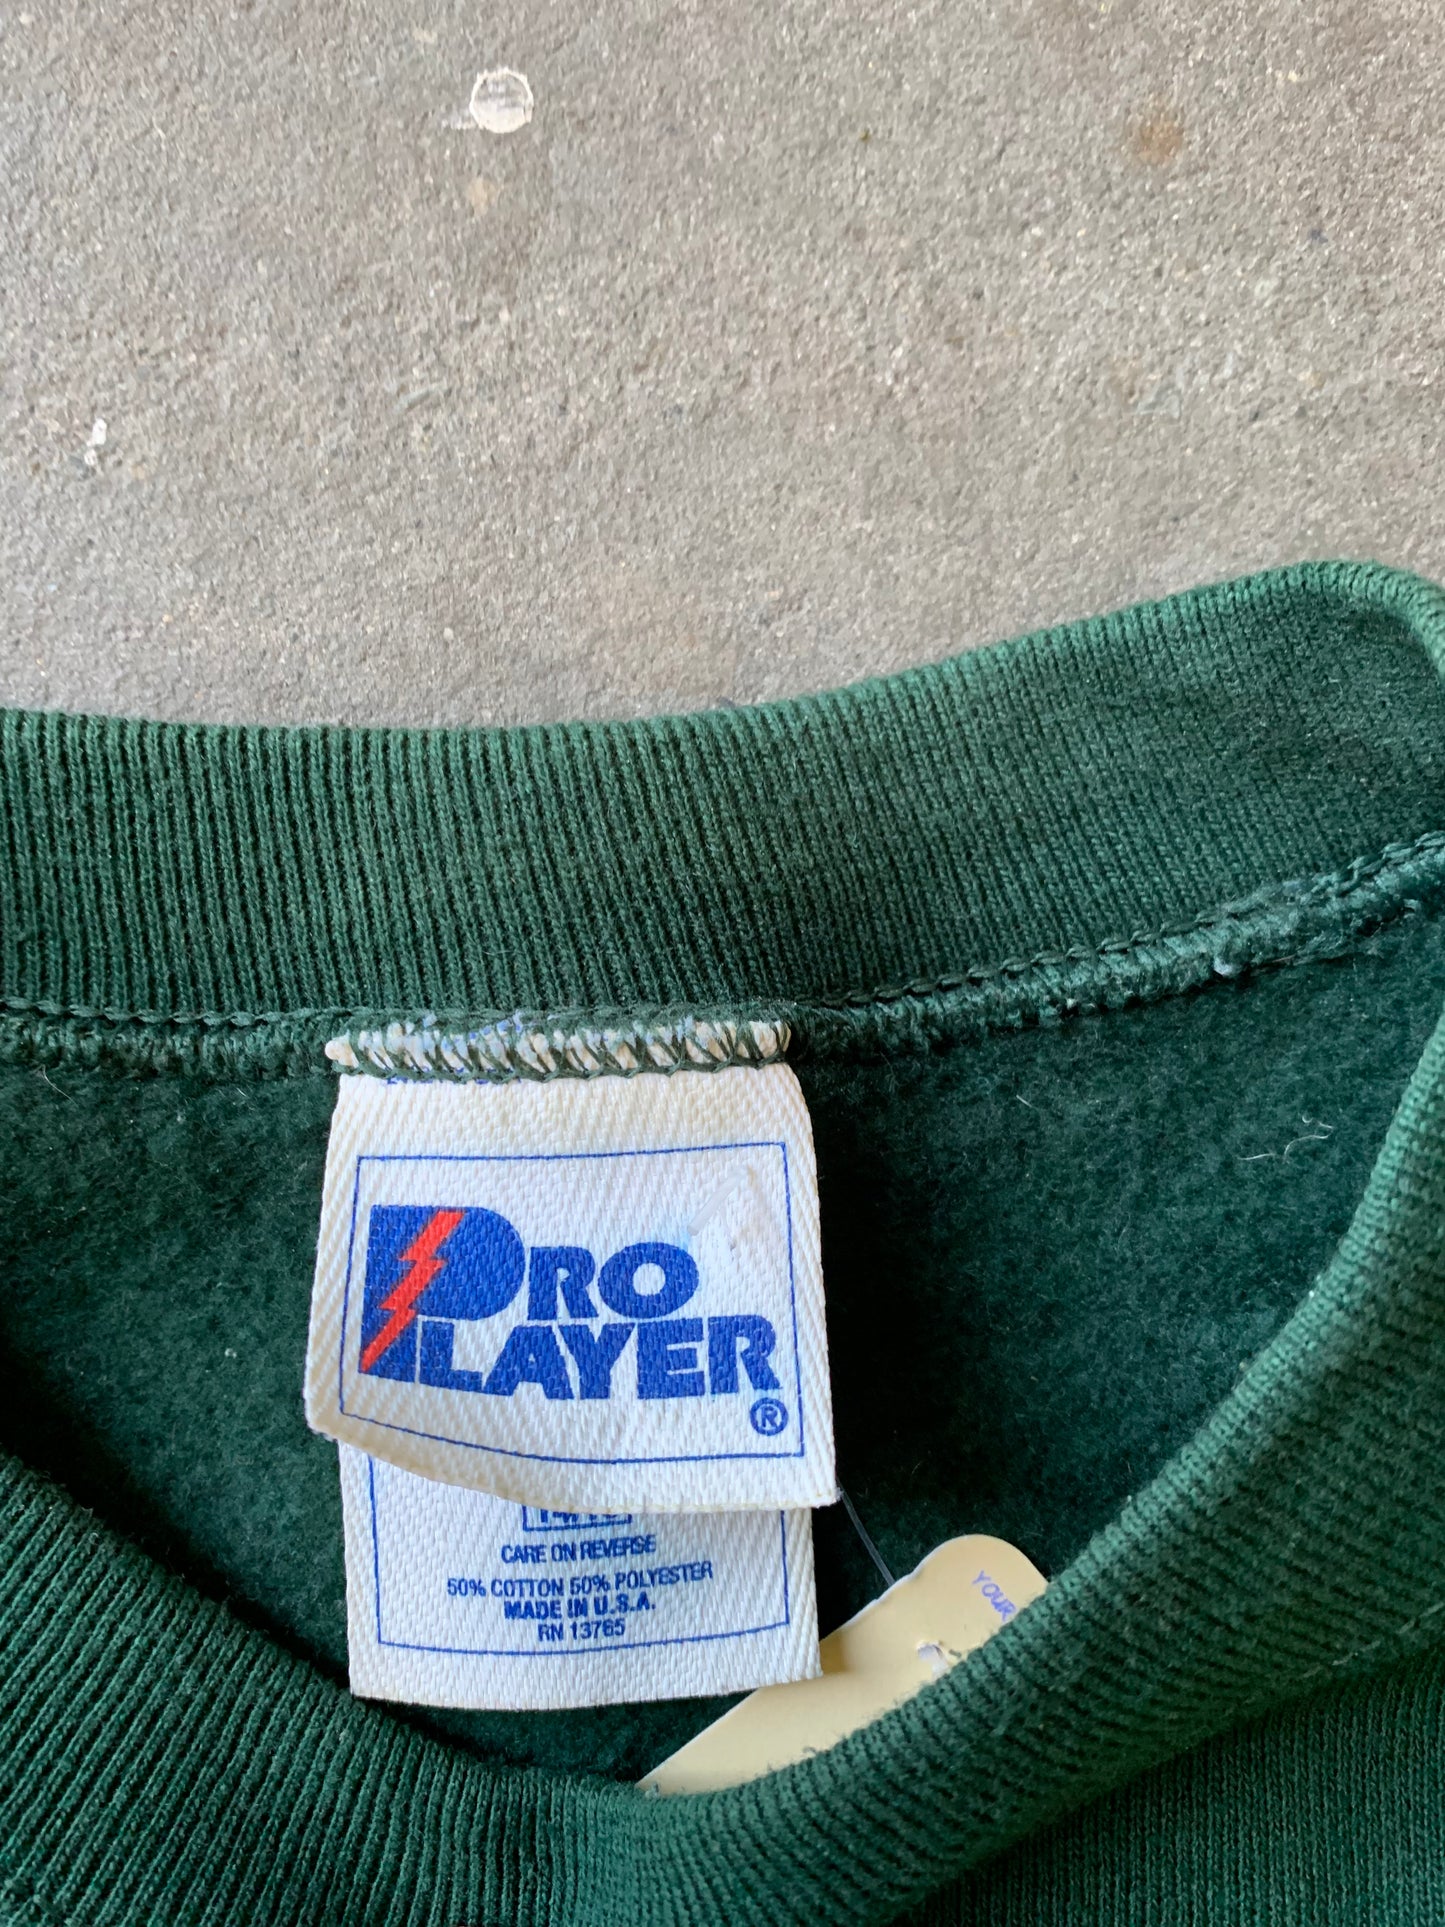 (S) 1997 Pro Player Green Bay Packers Crewneck